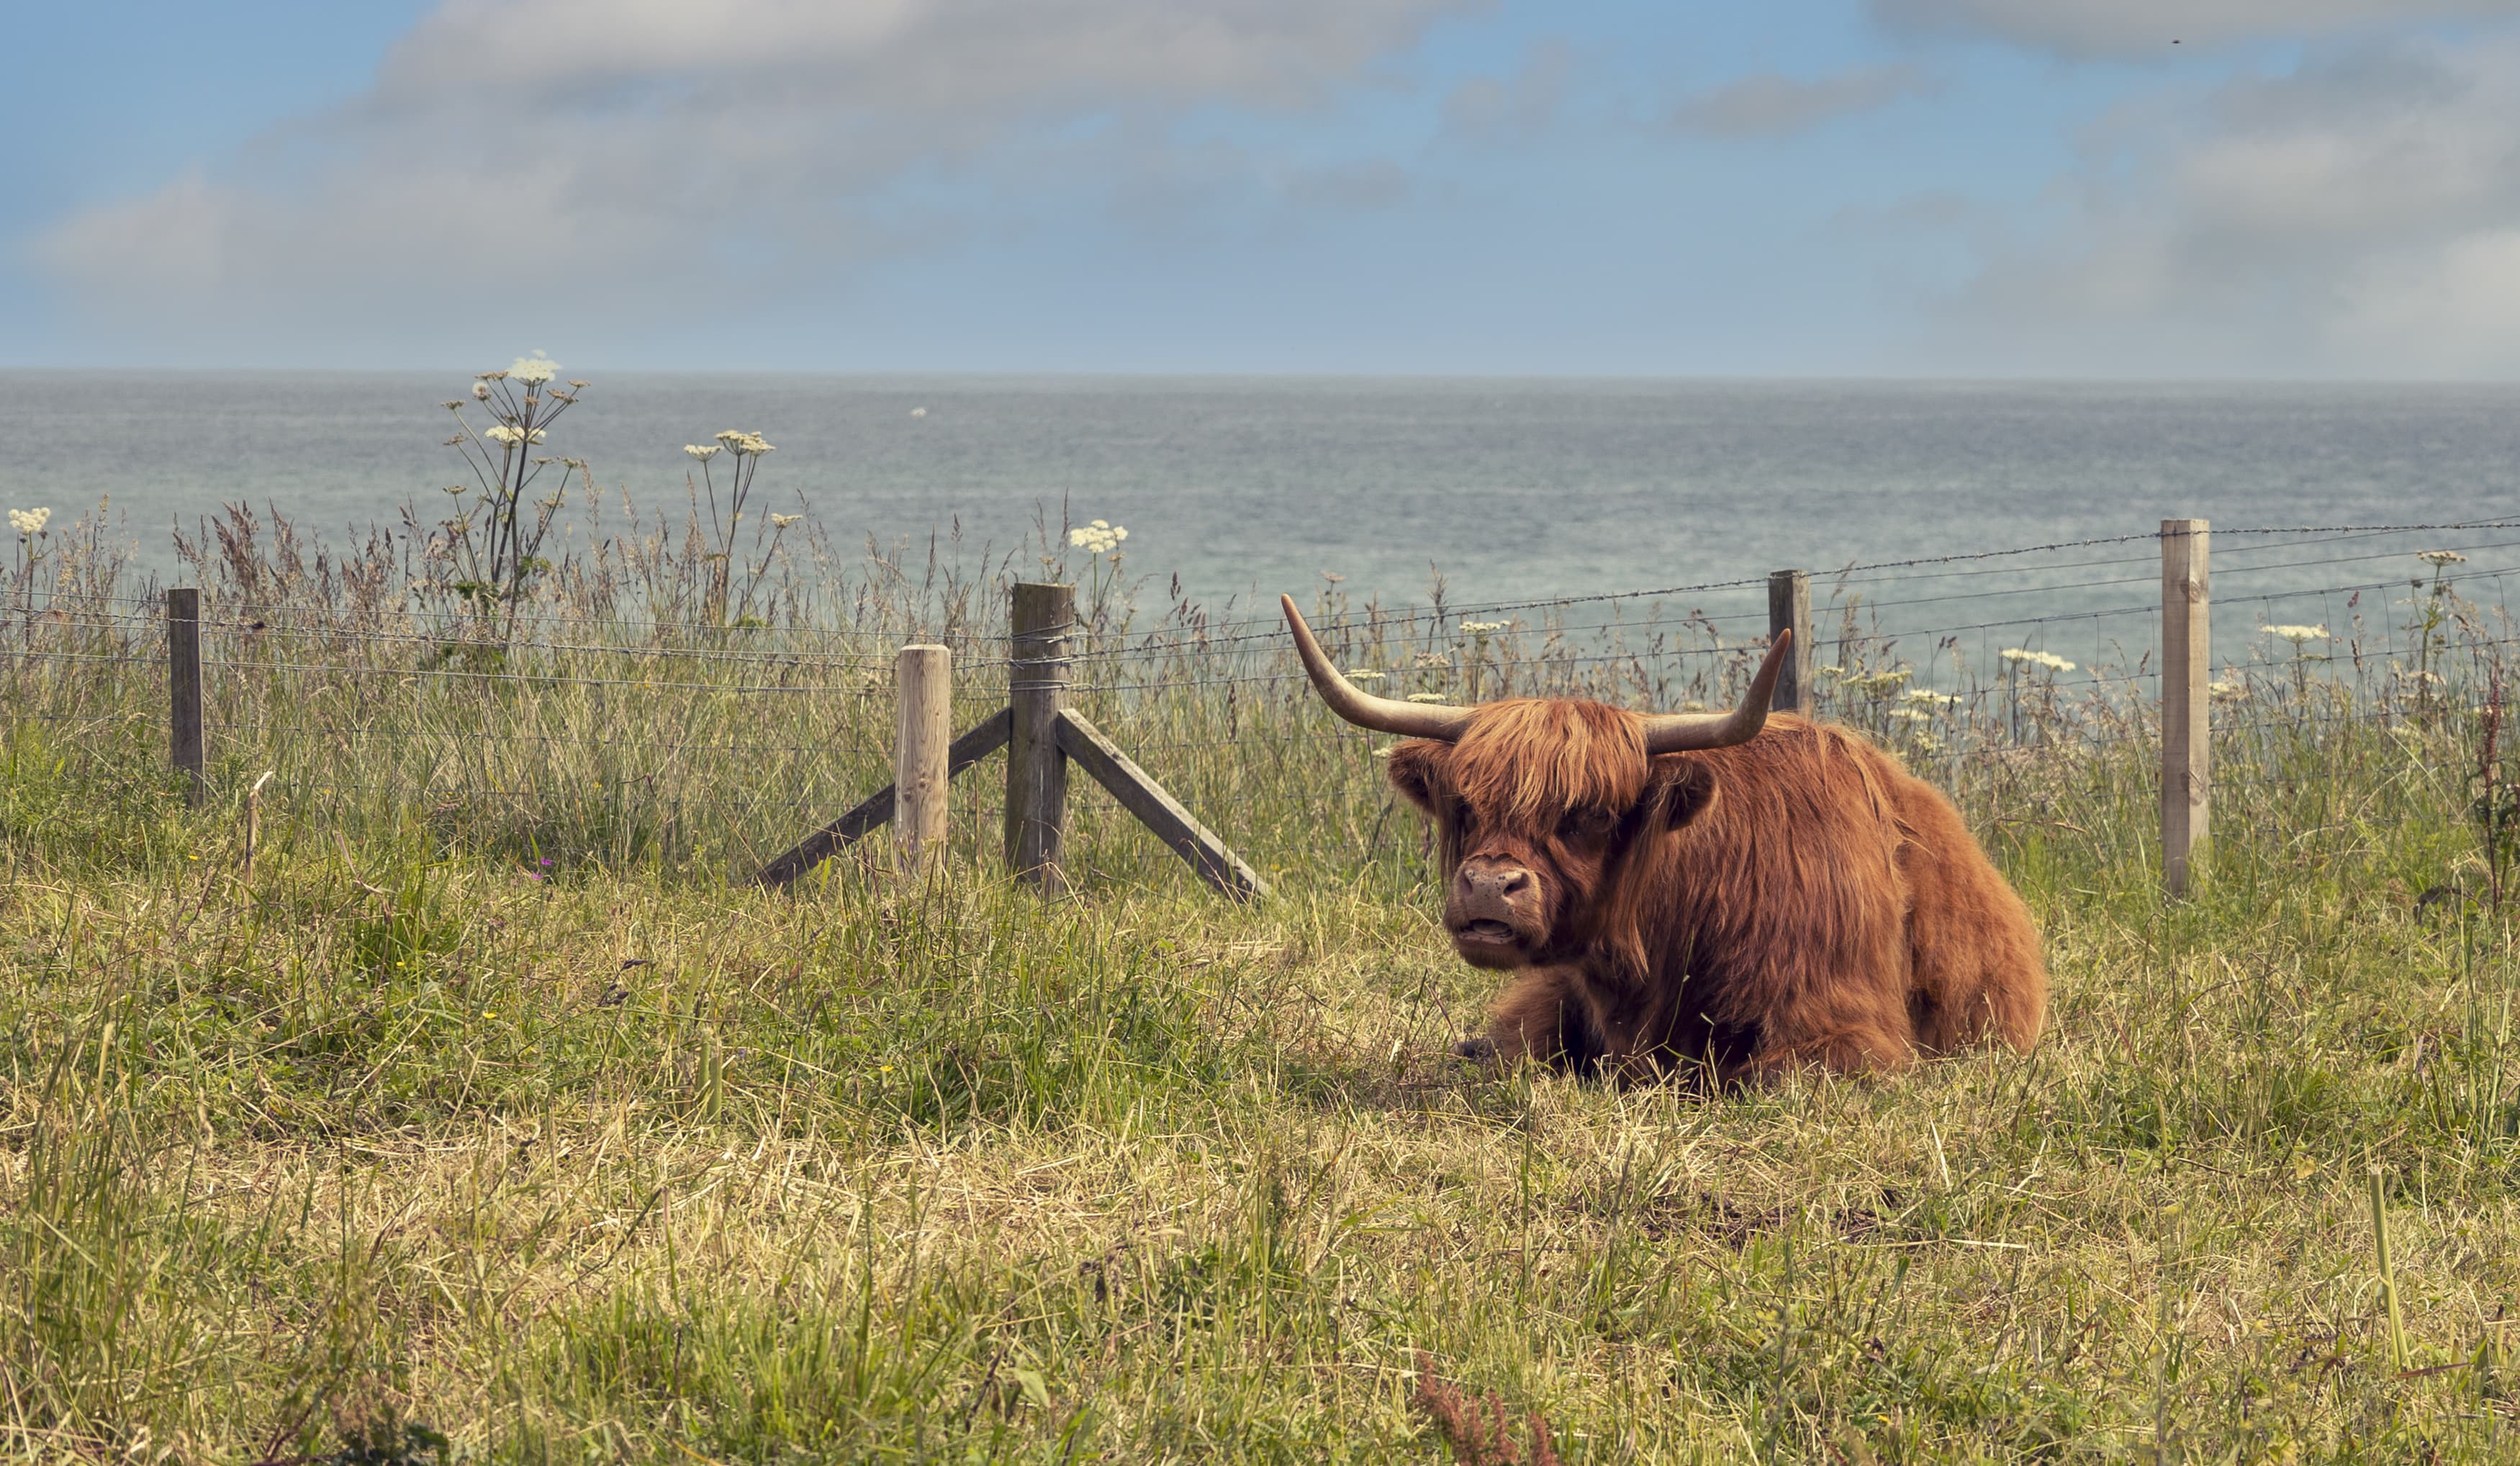 Brown long haired cow with large horns laying in grass, sea and cloudy skies in the background